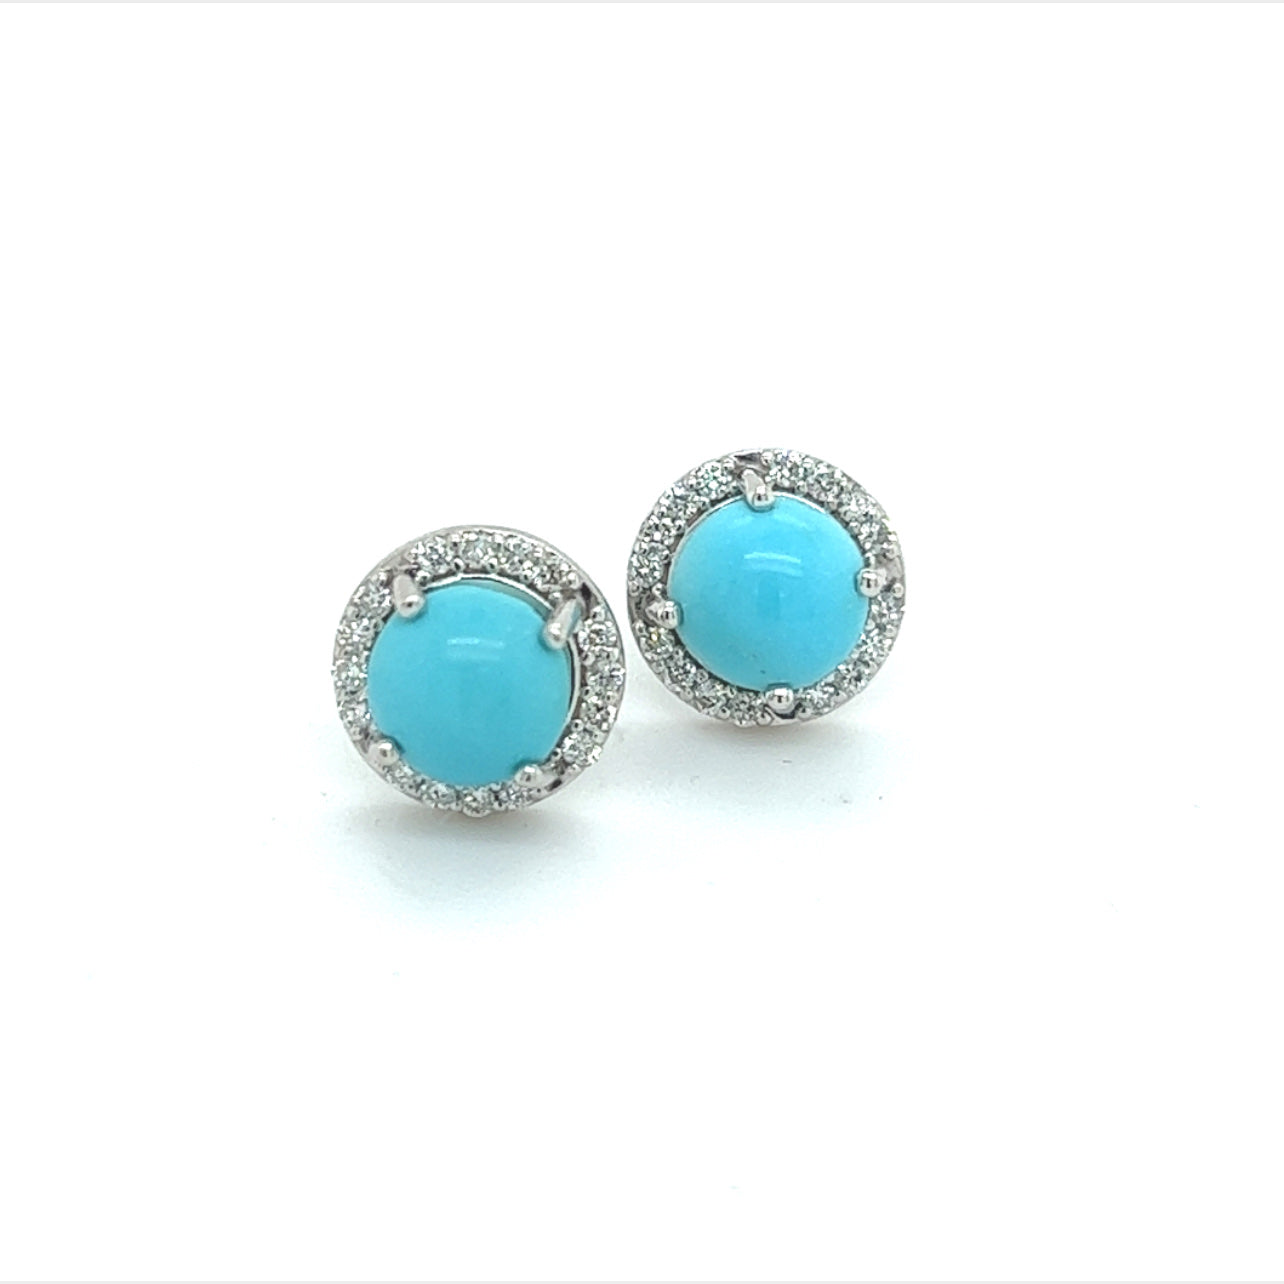 Zoë Chicco Zoe Chicco 14K Yellow Gold and Bezel Turquoise Stud Earrings |  Bloomingdale's